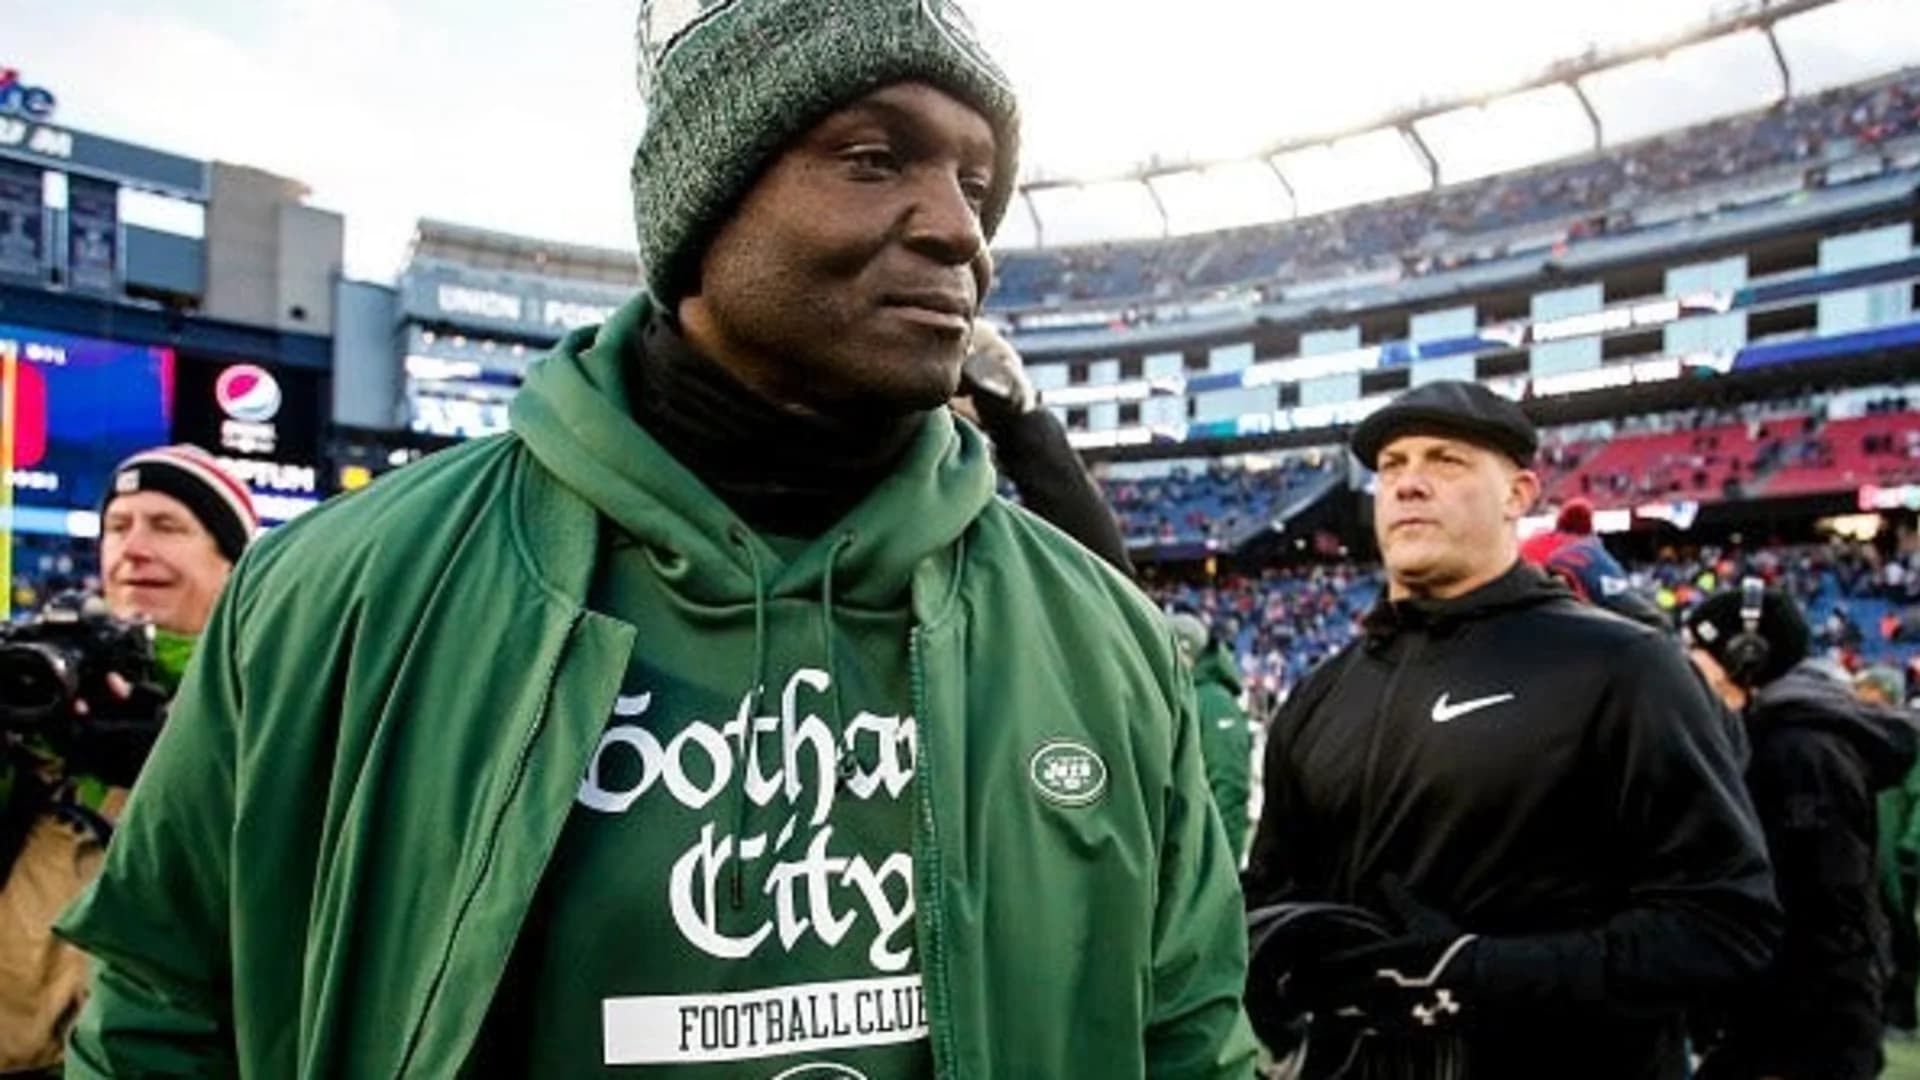 Jets fire coach Todd Bowles after 4 seasons with no playoffs